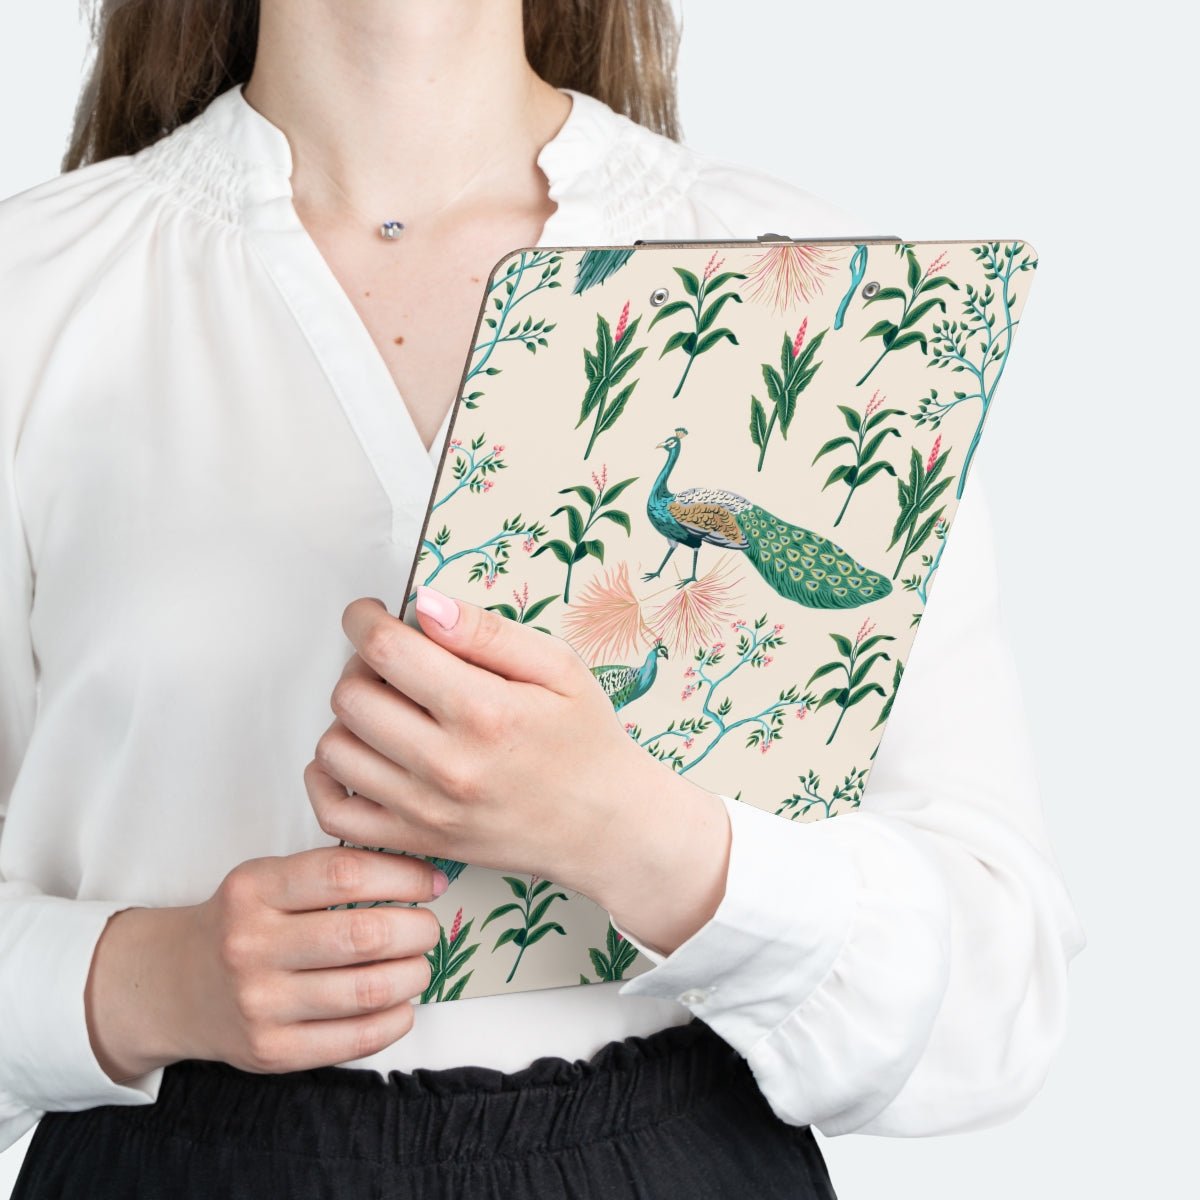 Chinoiserie Peacocks Clipboard - Puffin Lime